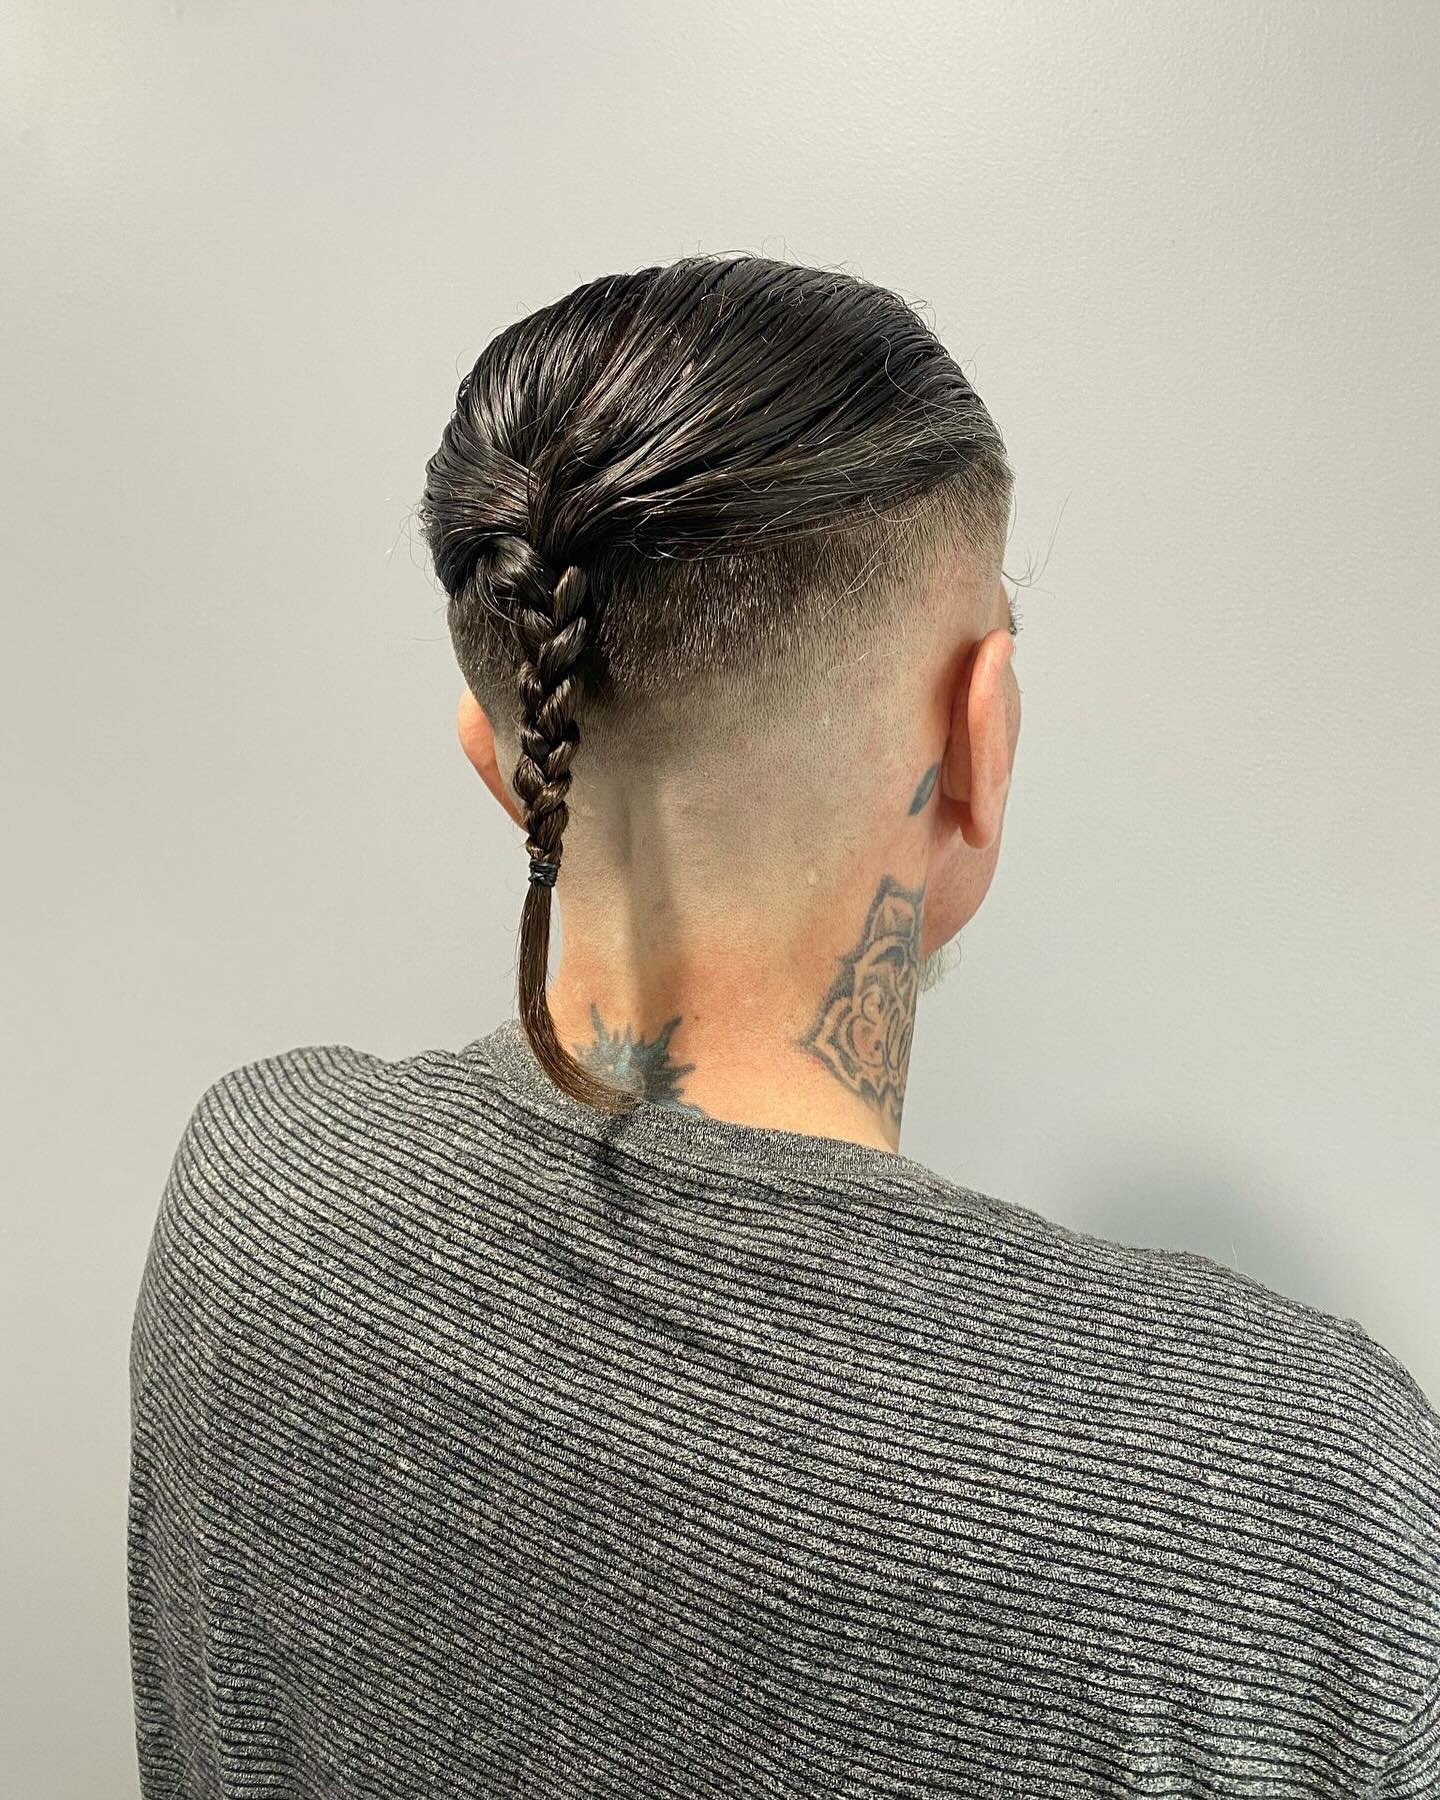 This 1st class is coming to close in a couple weeks. What an amazing ride so far. Our June class is currently booked, but we do have a few spots for October if interested! As always, we are doing $5 haircuts all week. Pop in or call 315-378-4014 to r